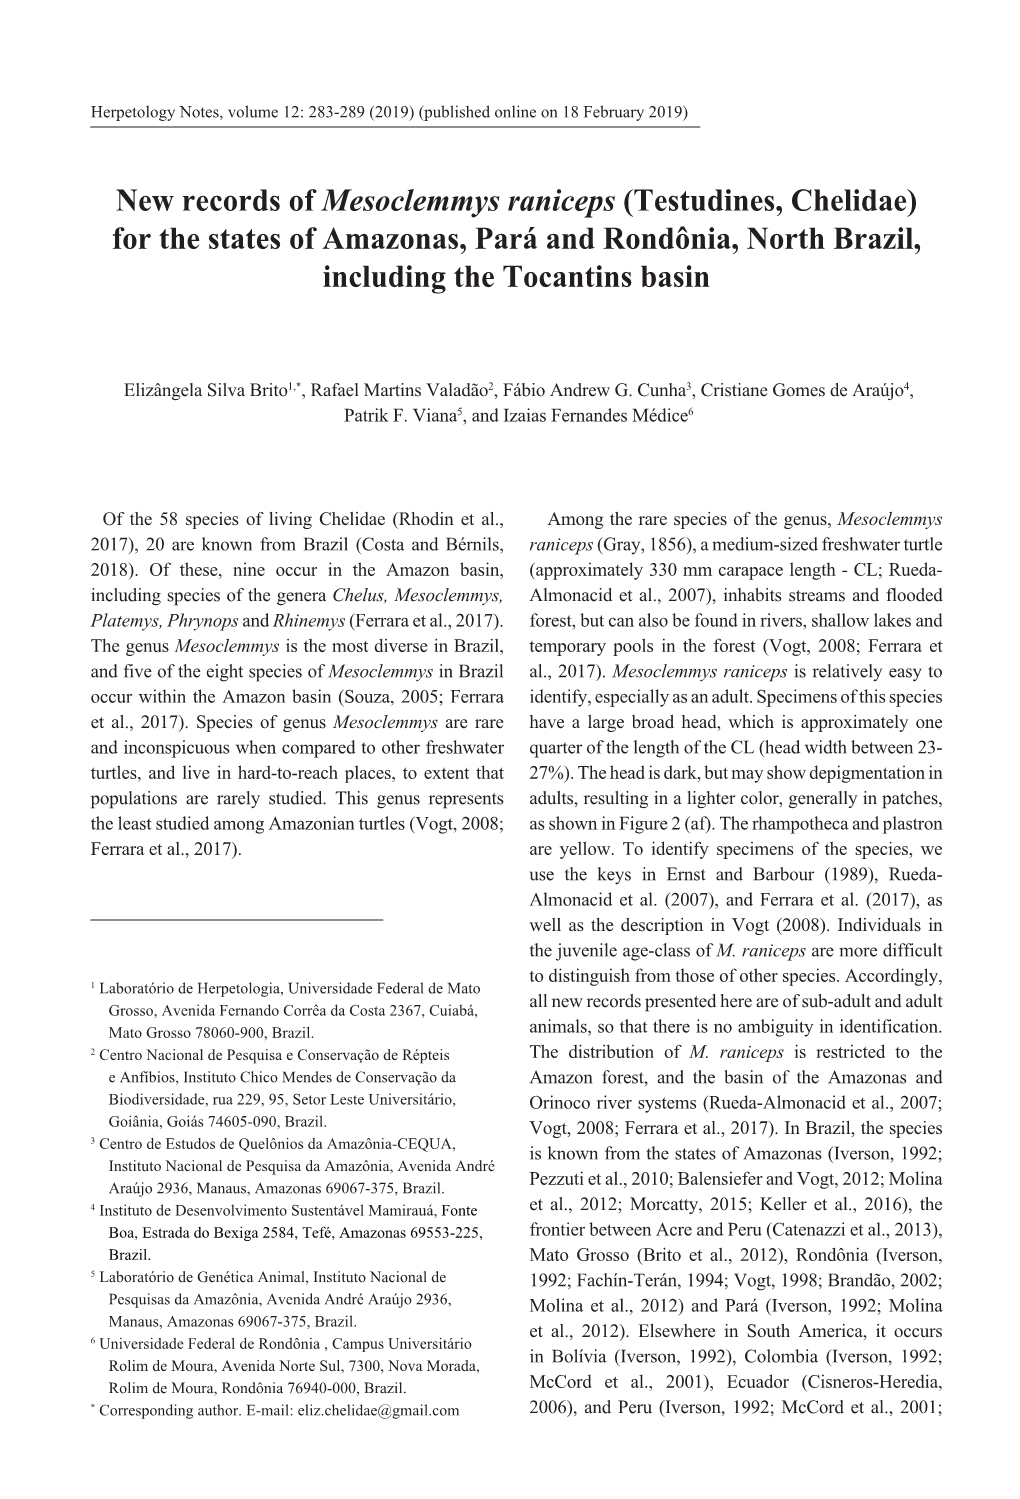 Testudines, Chelidae) for the States of Amazonas, Pará and Rondônia, North Brazil, Including the Tocantins Basin